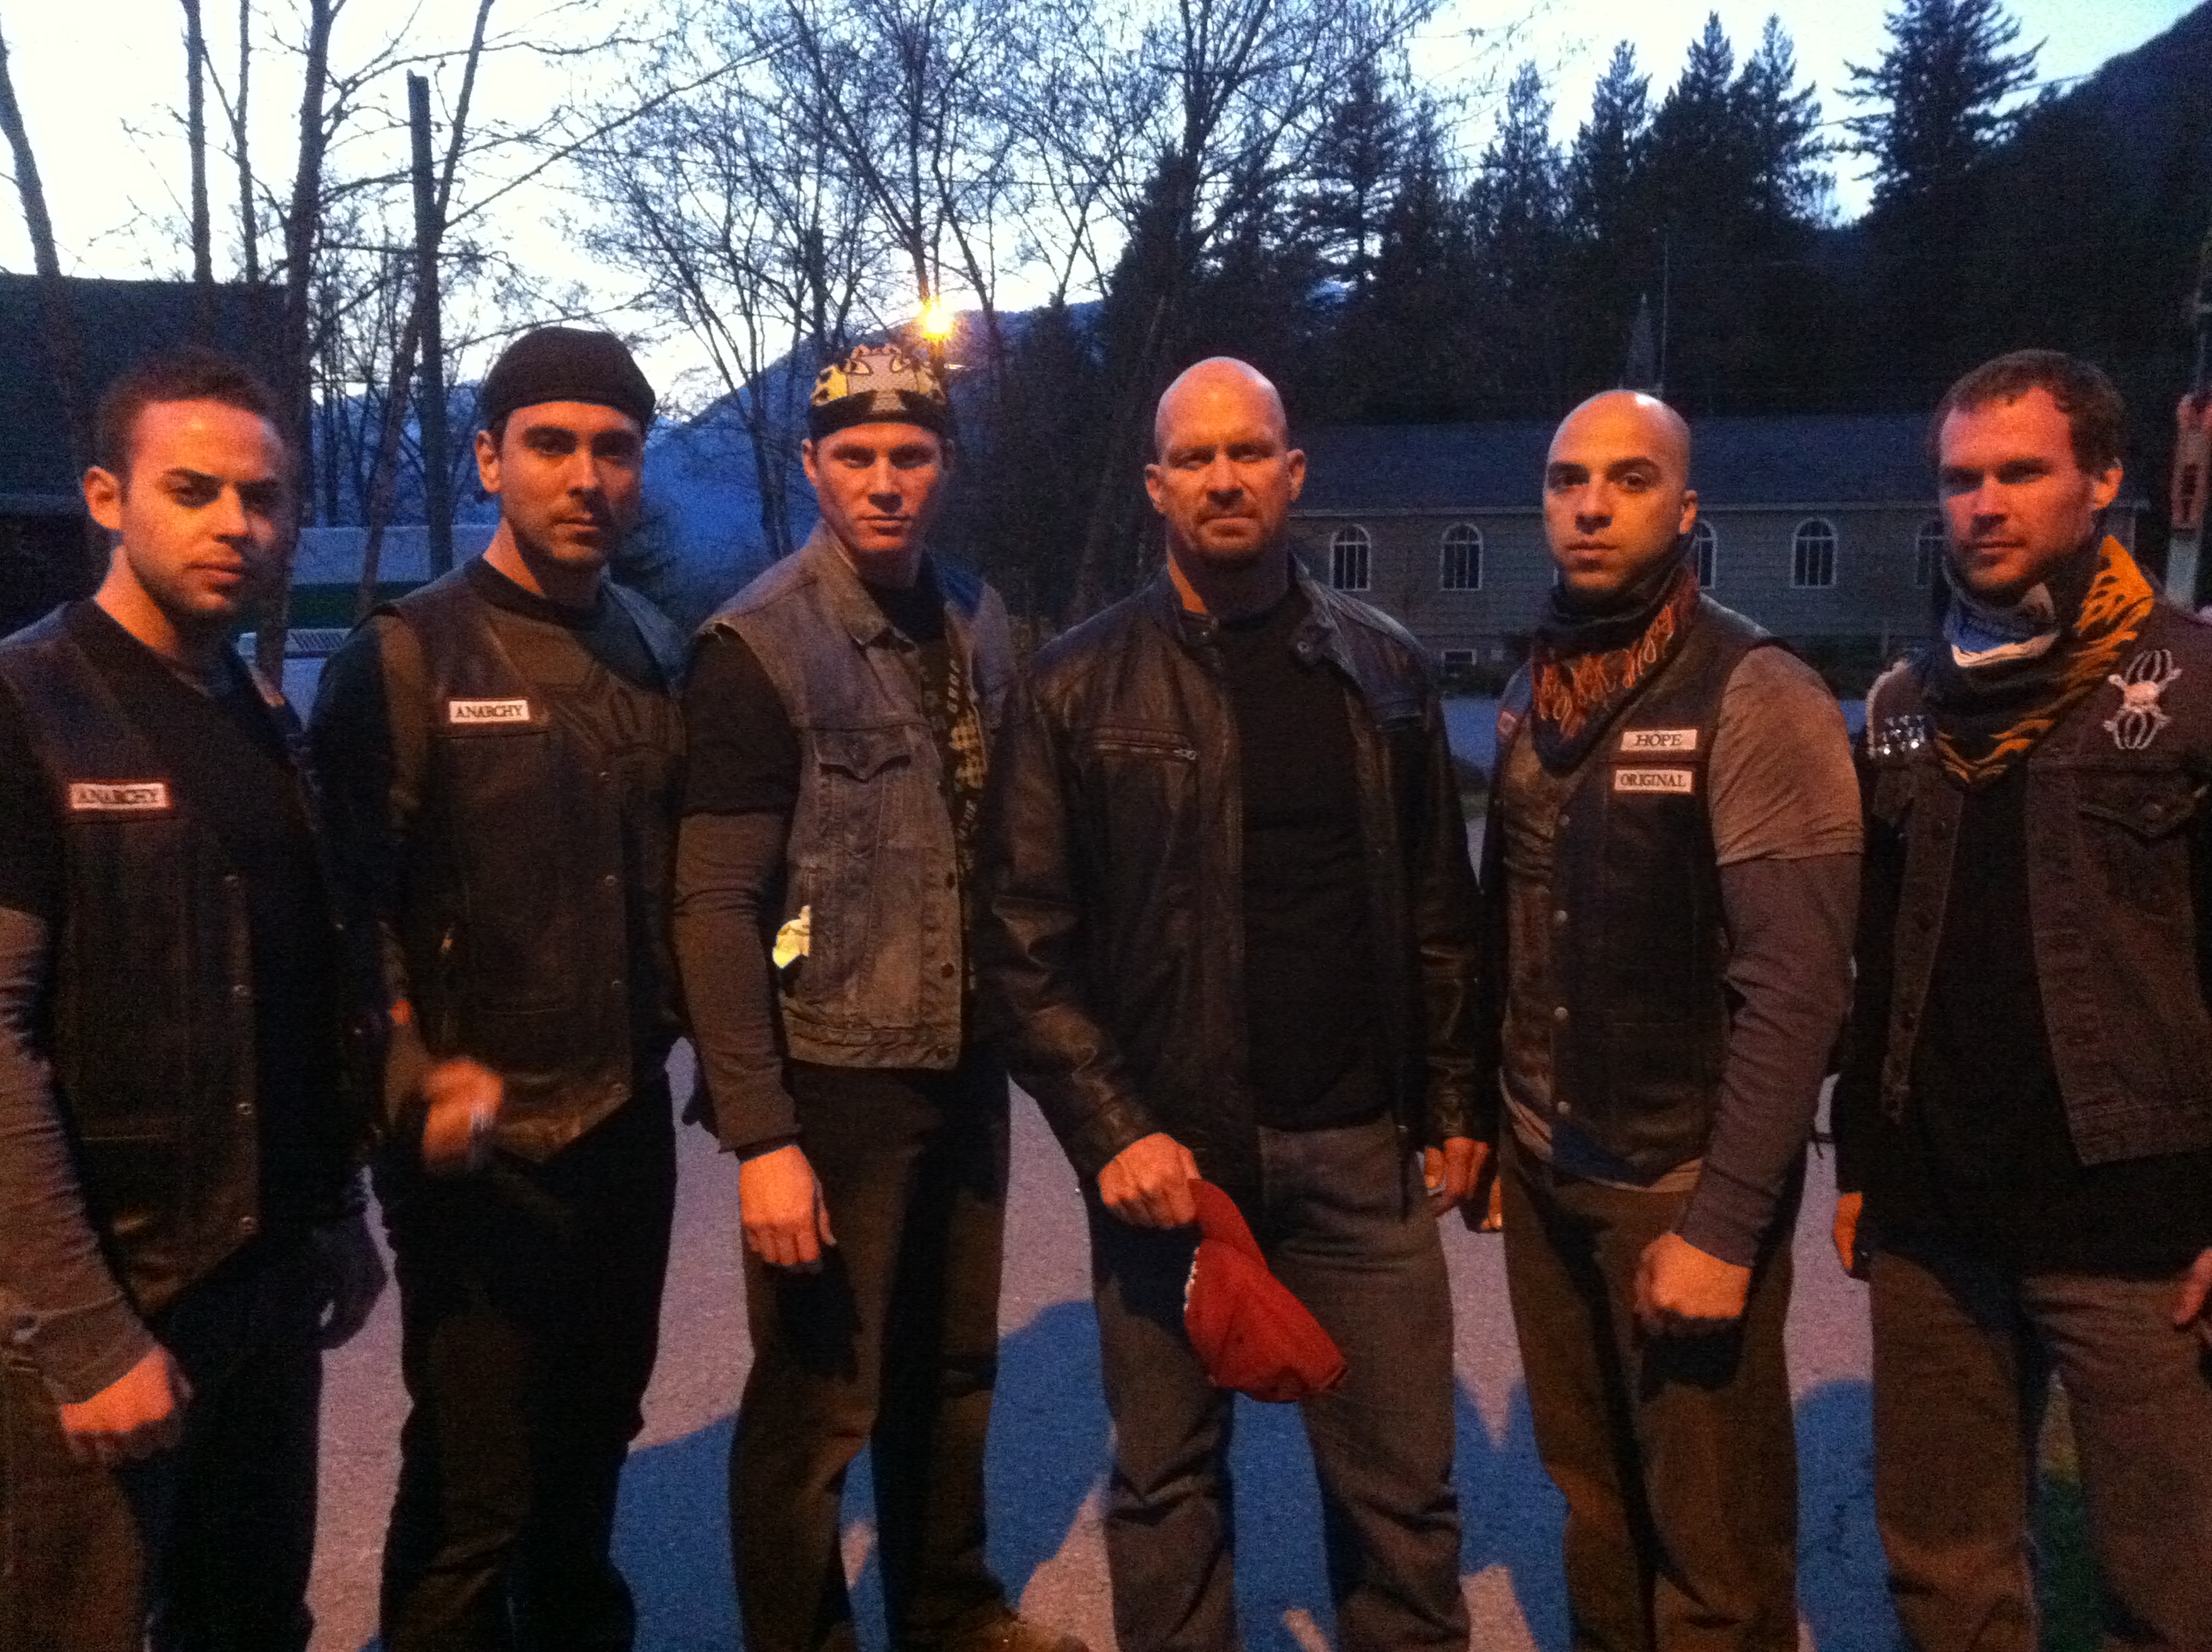 RECOIL feature - biker gang with Stone Cold Steve Austin